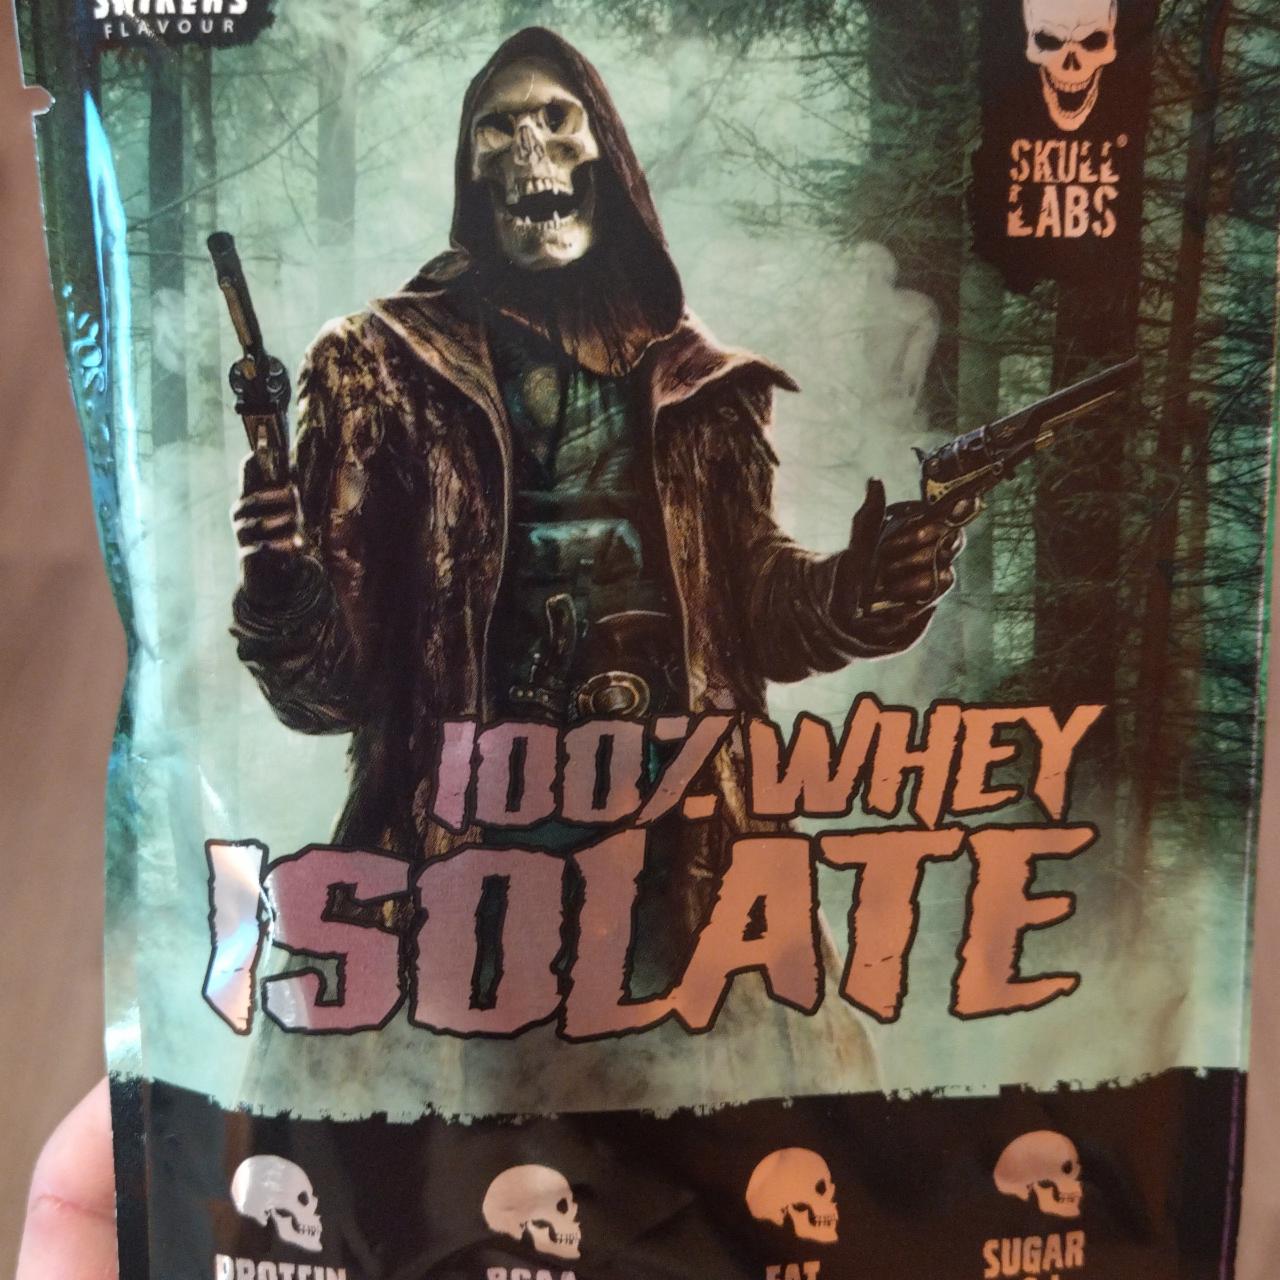 Fotografie - 100% Whey Isolate Snickers Skull Labs